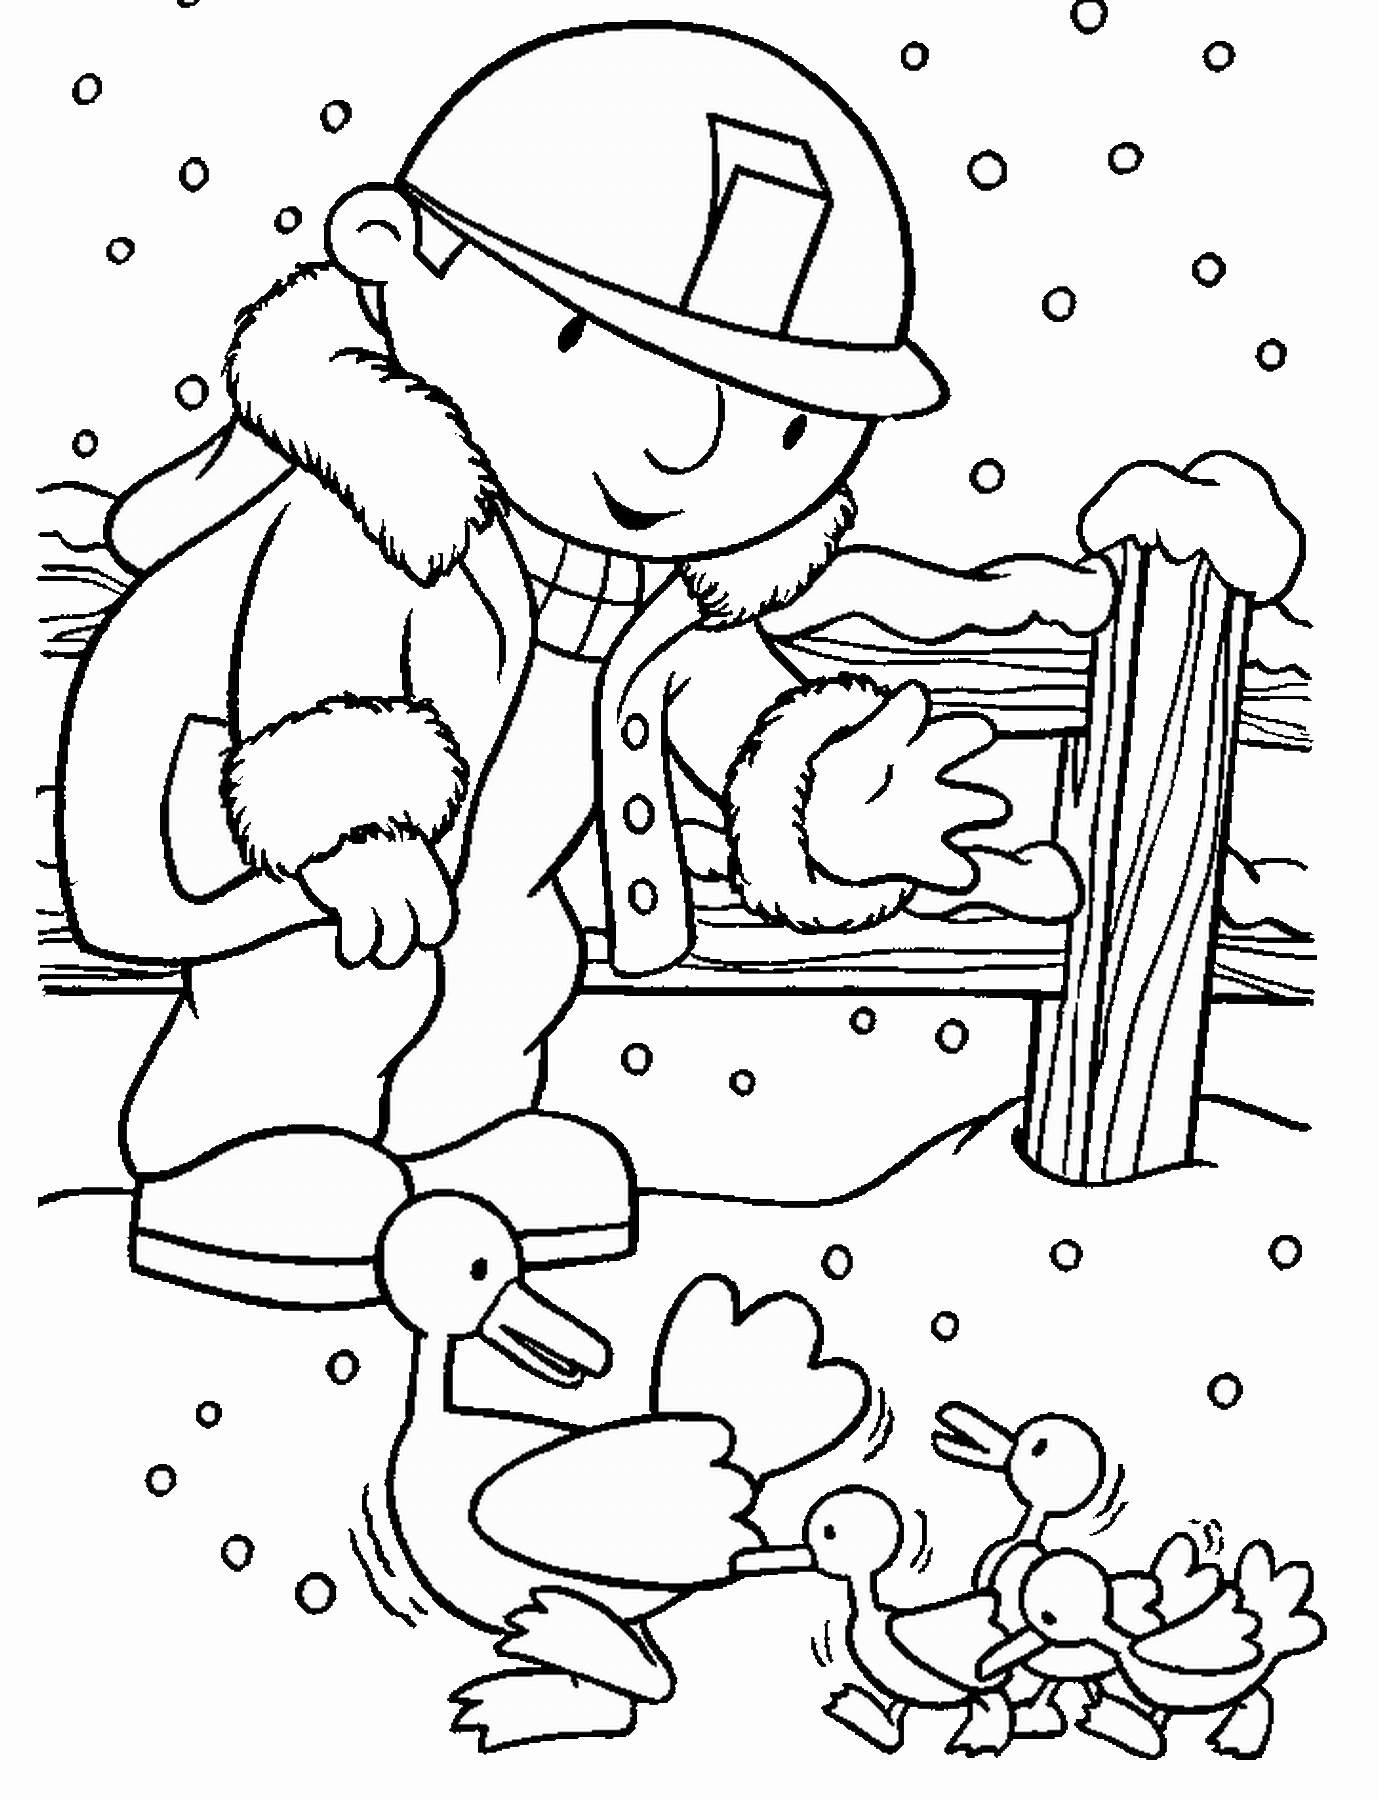 Bob the Builder Coloring Pages TV Film bob the builder_28 Printable 2020 00978 Coloring4free